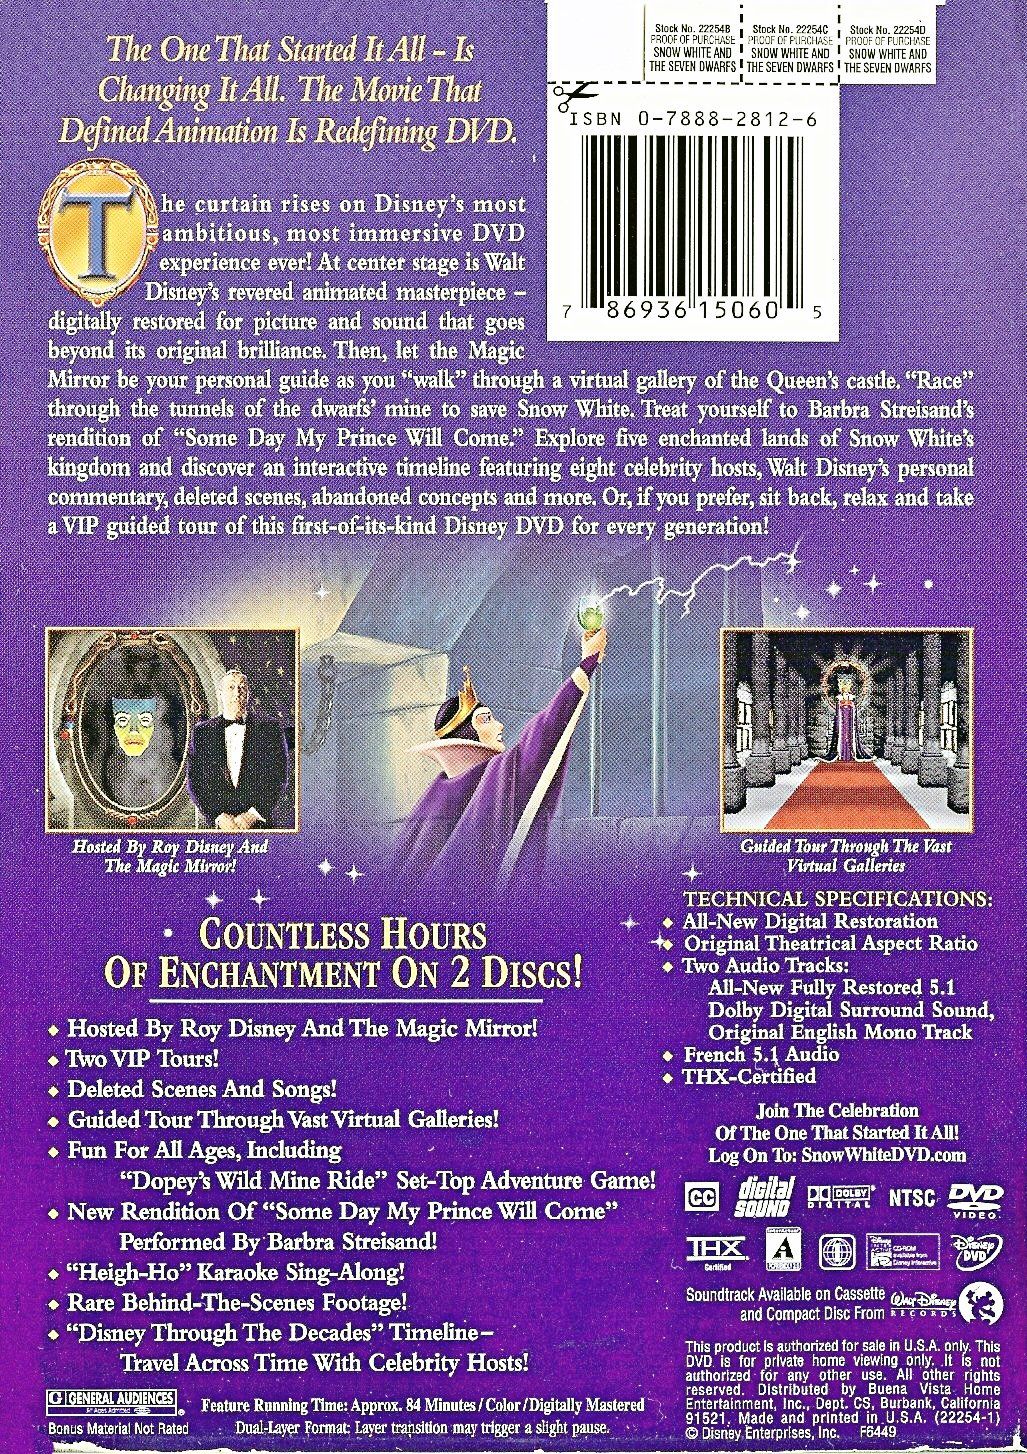 Back cover of the Snow White Platinum DVD, with Streisand's name.